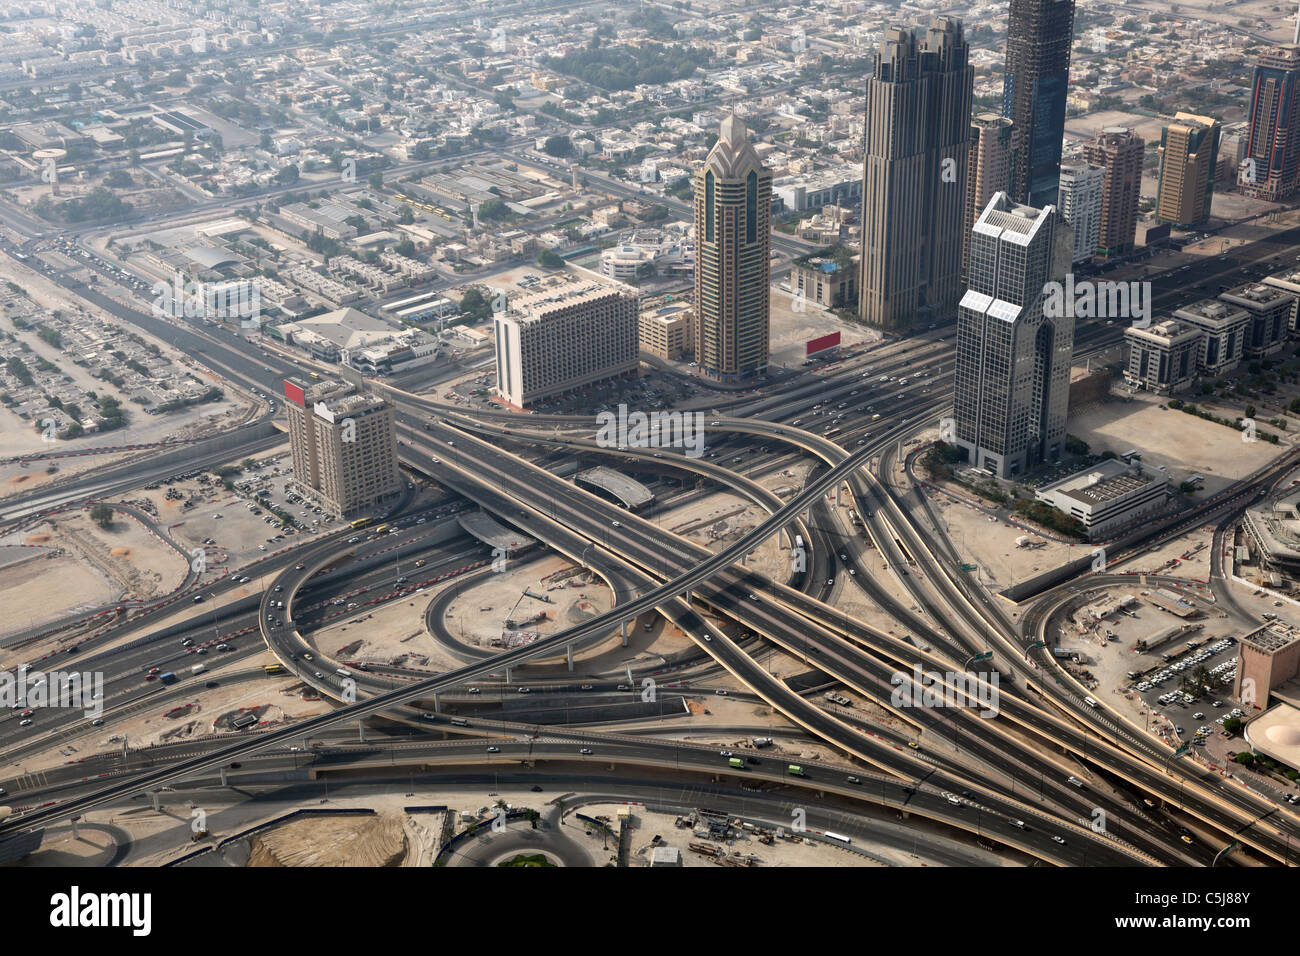 Aerial view of a highway junction in Dubai, United Arab Emirates Stock Photo